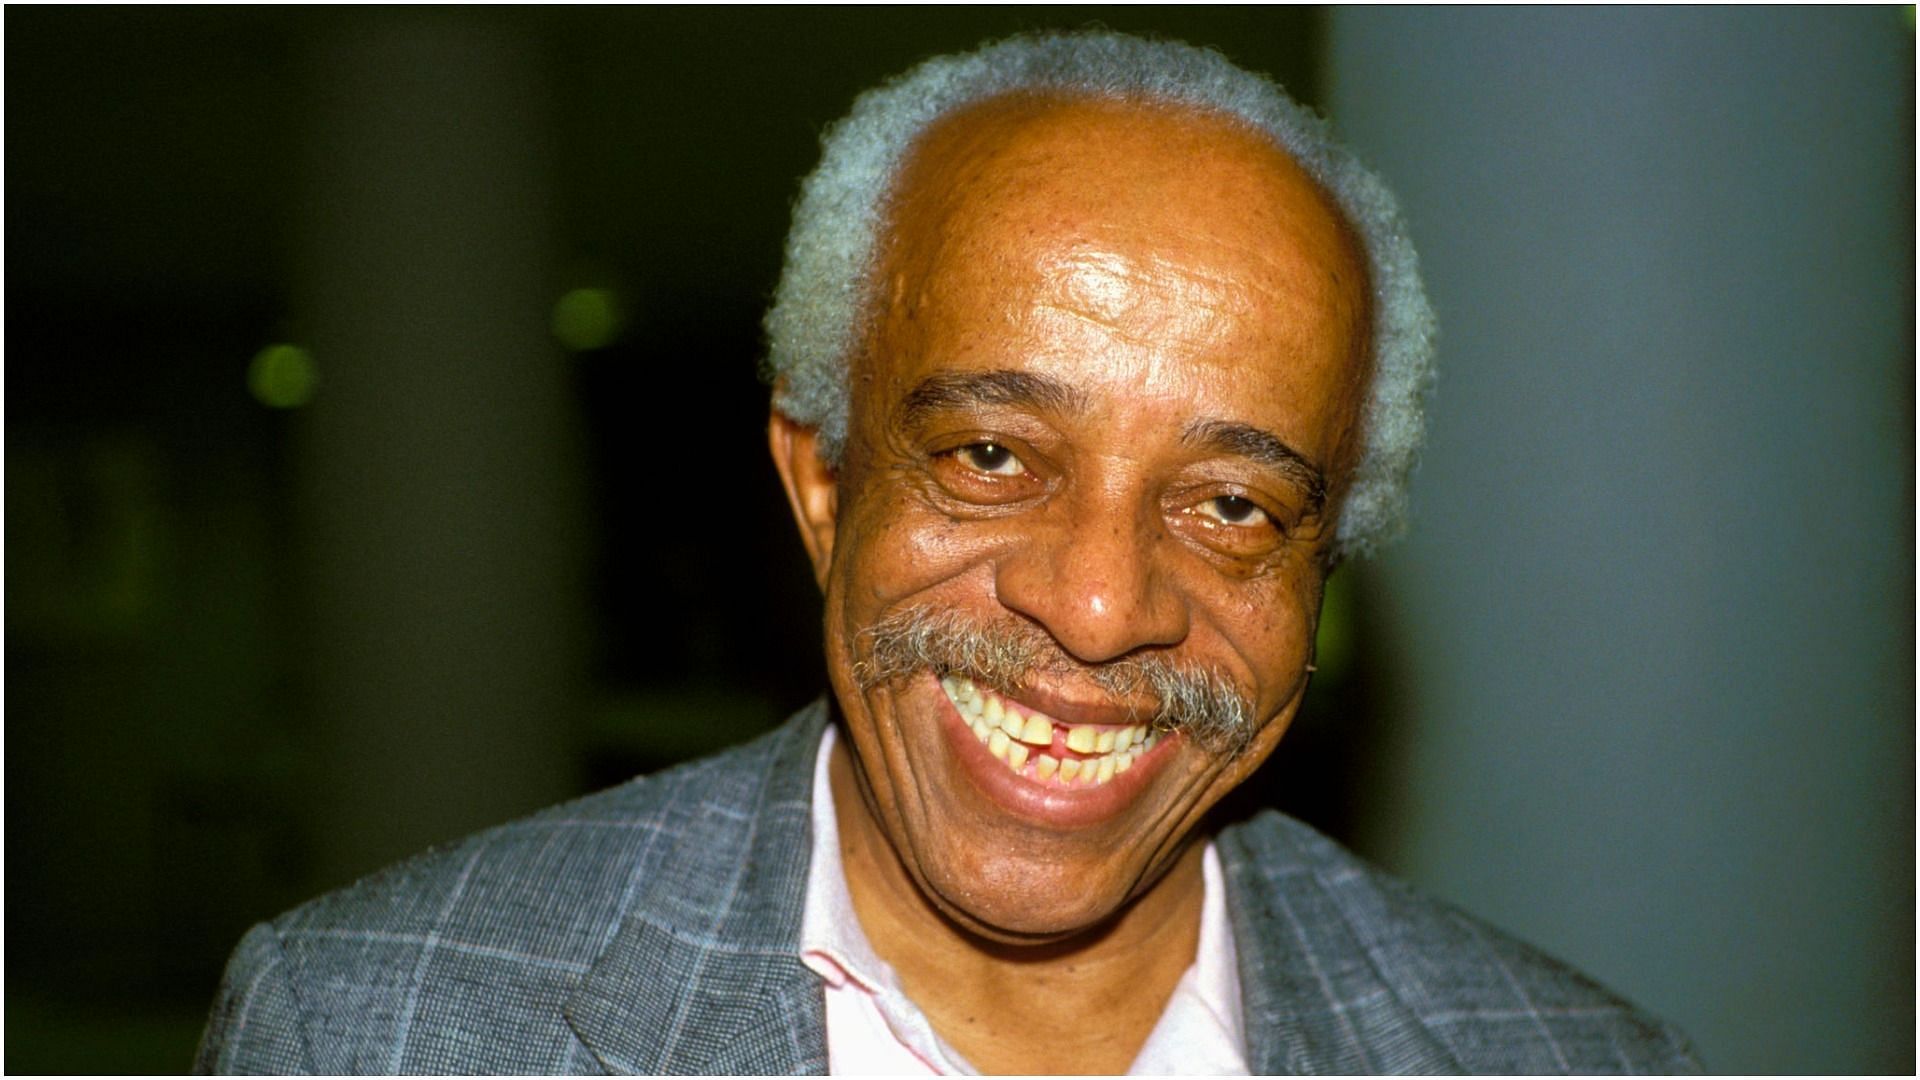 Barry Harris recently passed away at the age of 91 (Image by Frans Schellekens via Getty Images)